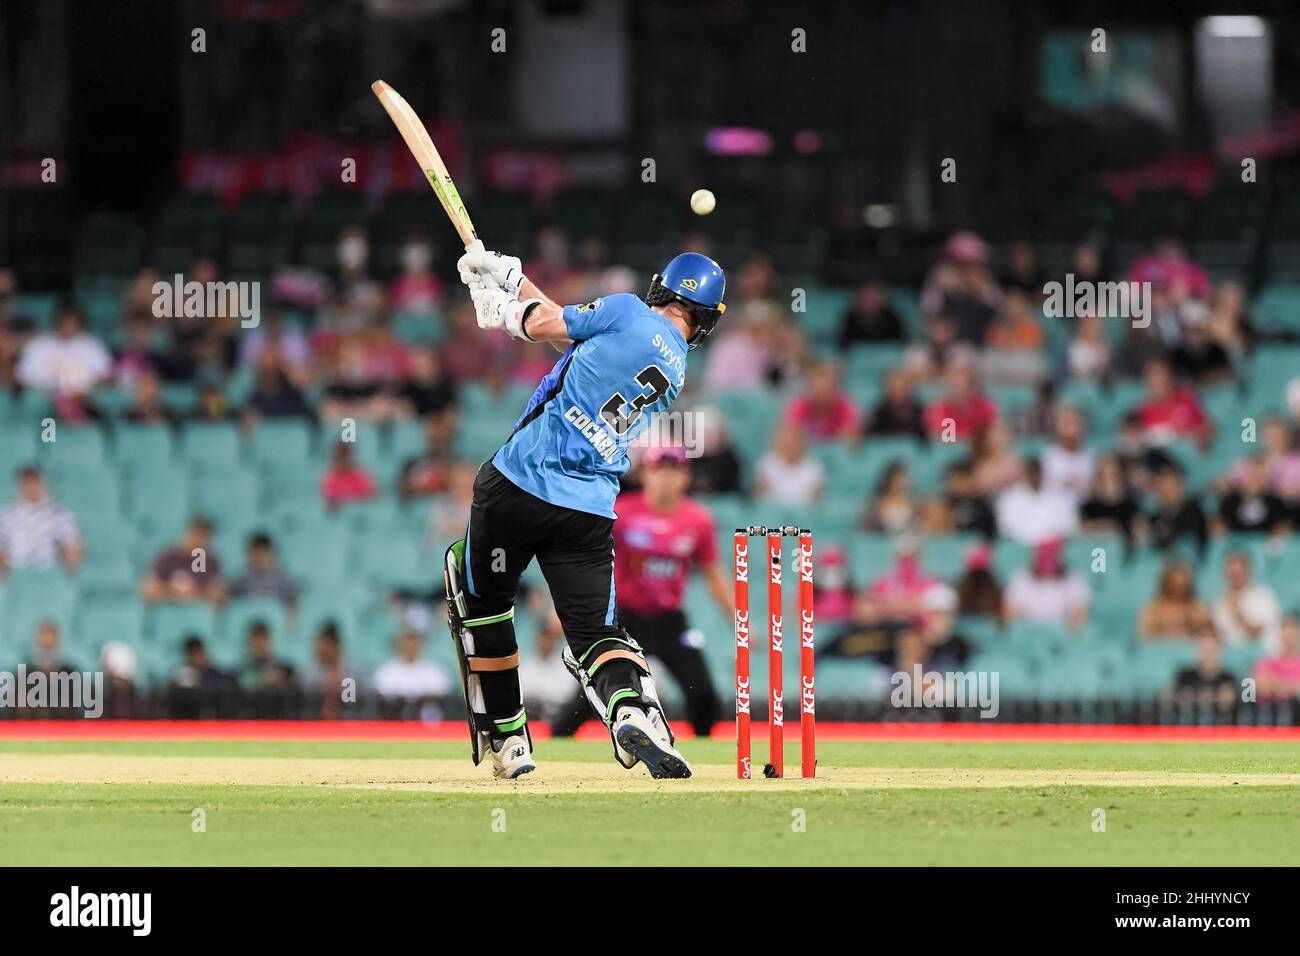 Sydney, Australia, 26 January, 2022. Thomas Kelly of the Strikers bats during the Big Bash League Challenger cricket match between Sydney Sixers and Adelaide Strikers at The Sydney Cricket Ground on January 26, 2022 in Sydney, Australia. Credit: Steven Markham/Speed Media/Alamy Live News Stock Photo